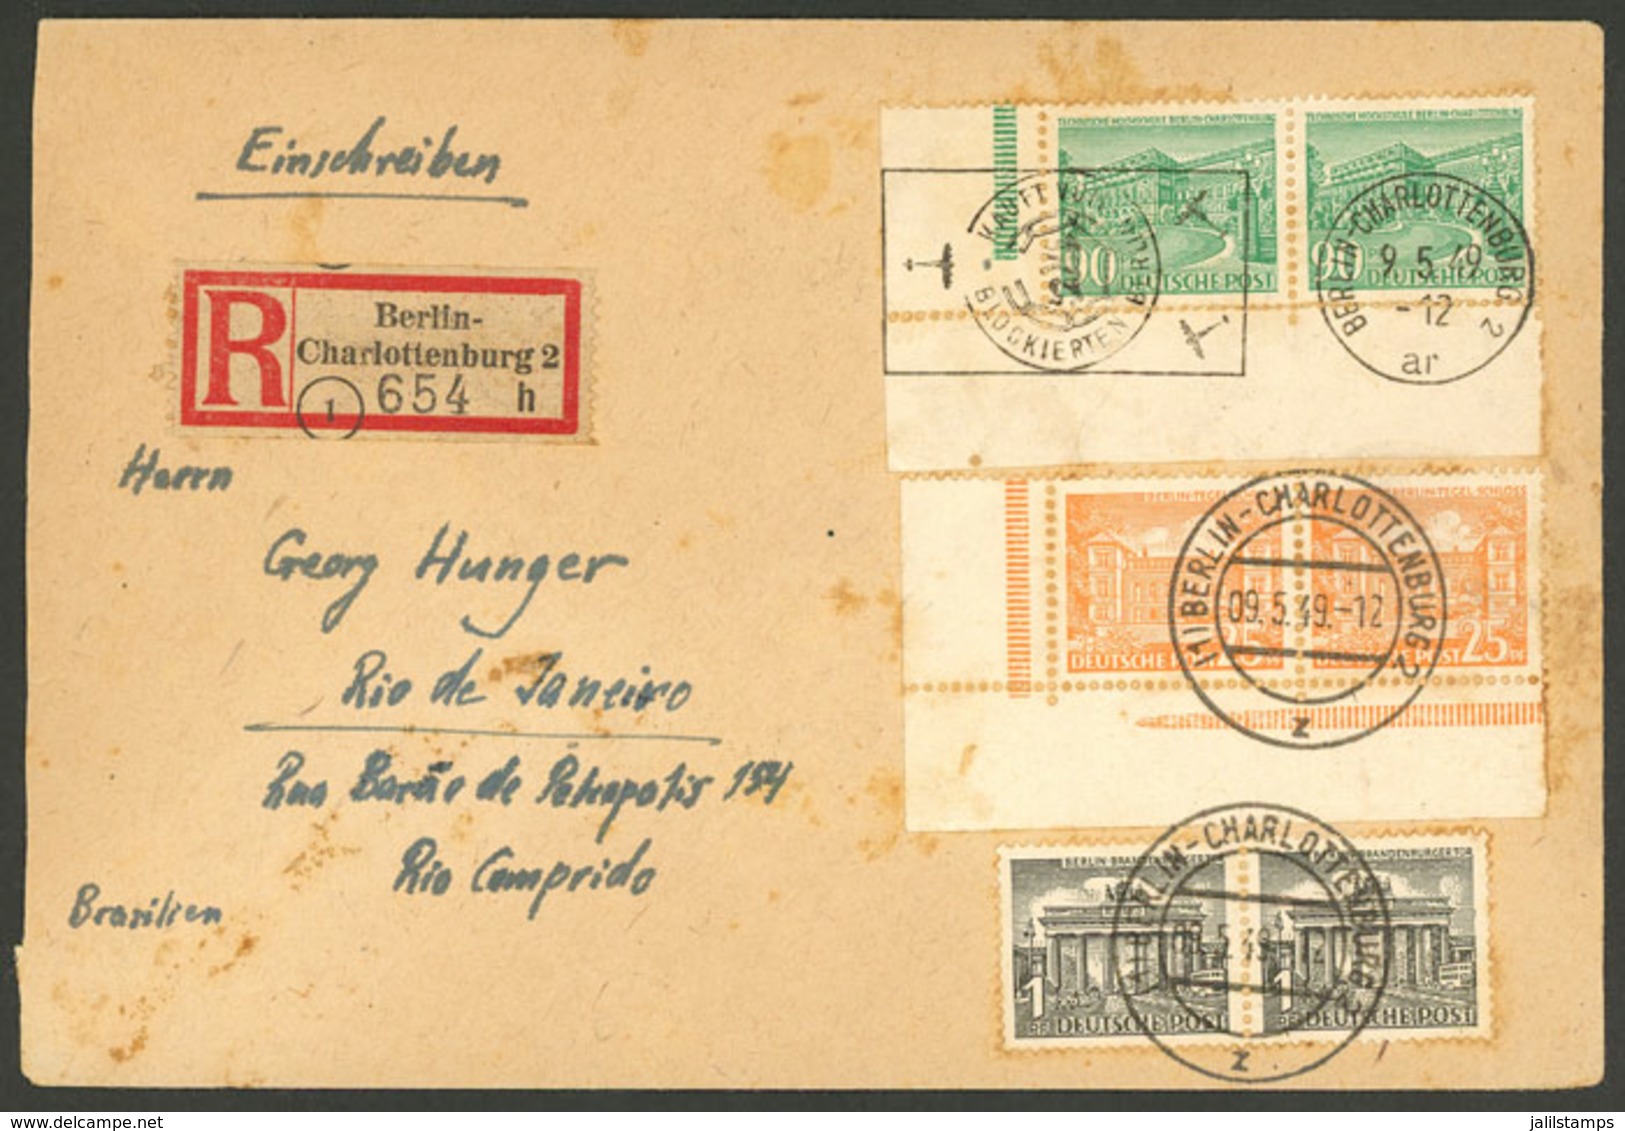 GERMANY - BERLIN: Registered Cover Sent To Brazil On 9/MAY/1949 With Nice Postage, Some Light Staining, All The Same Att - Covers & Documents